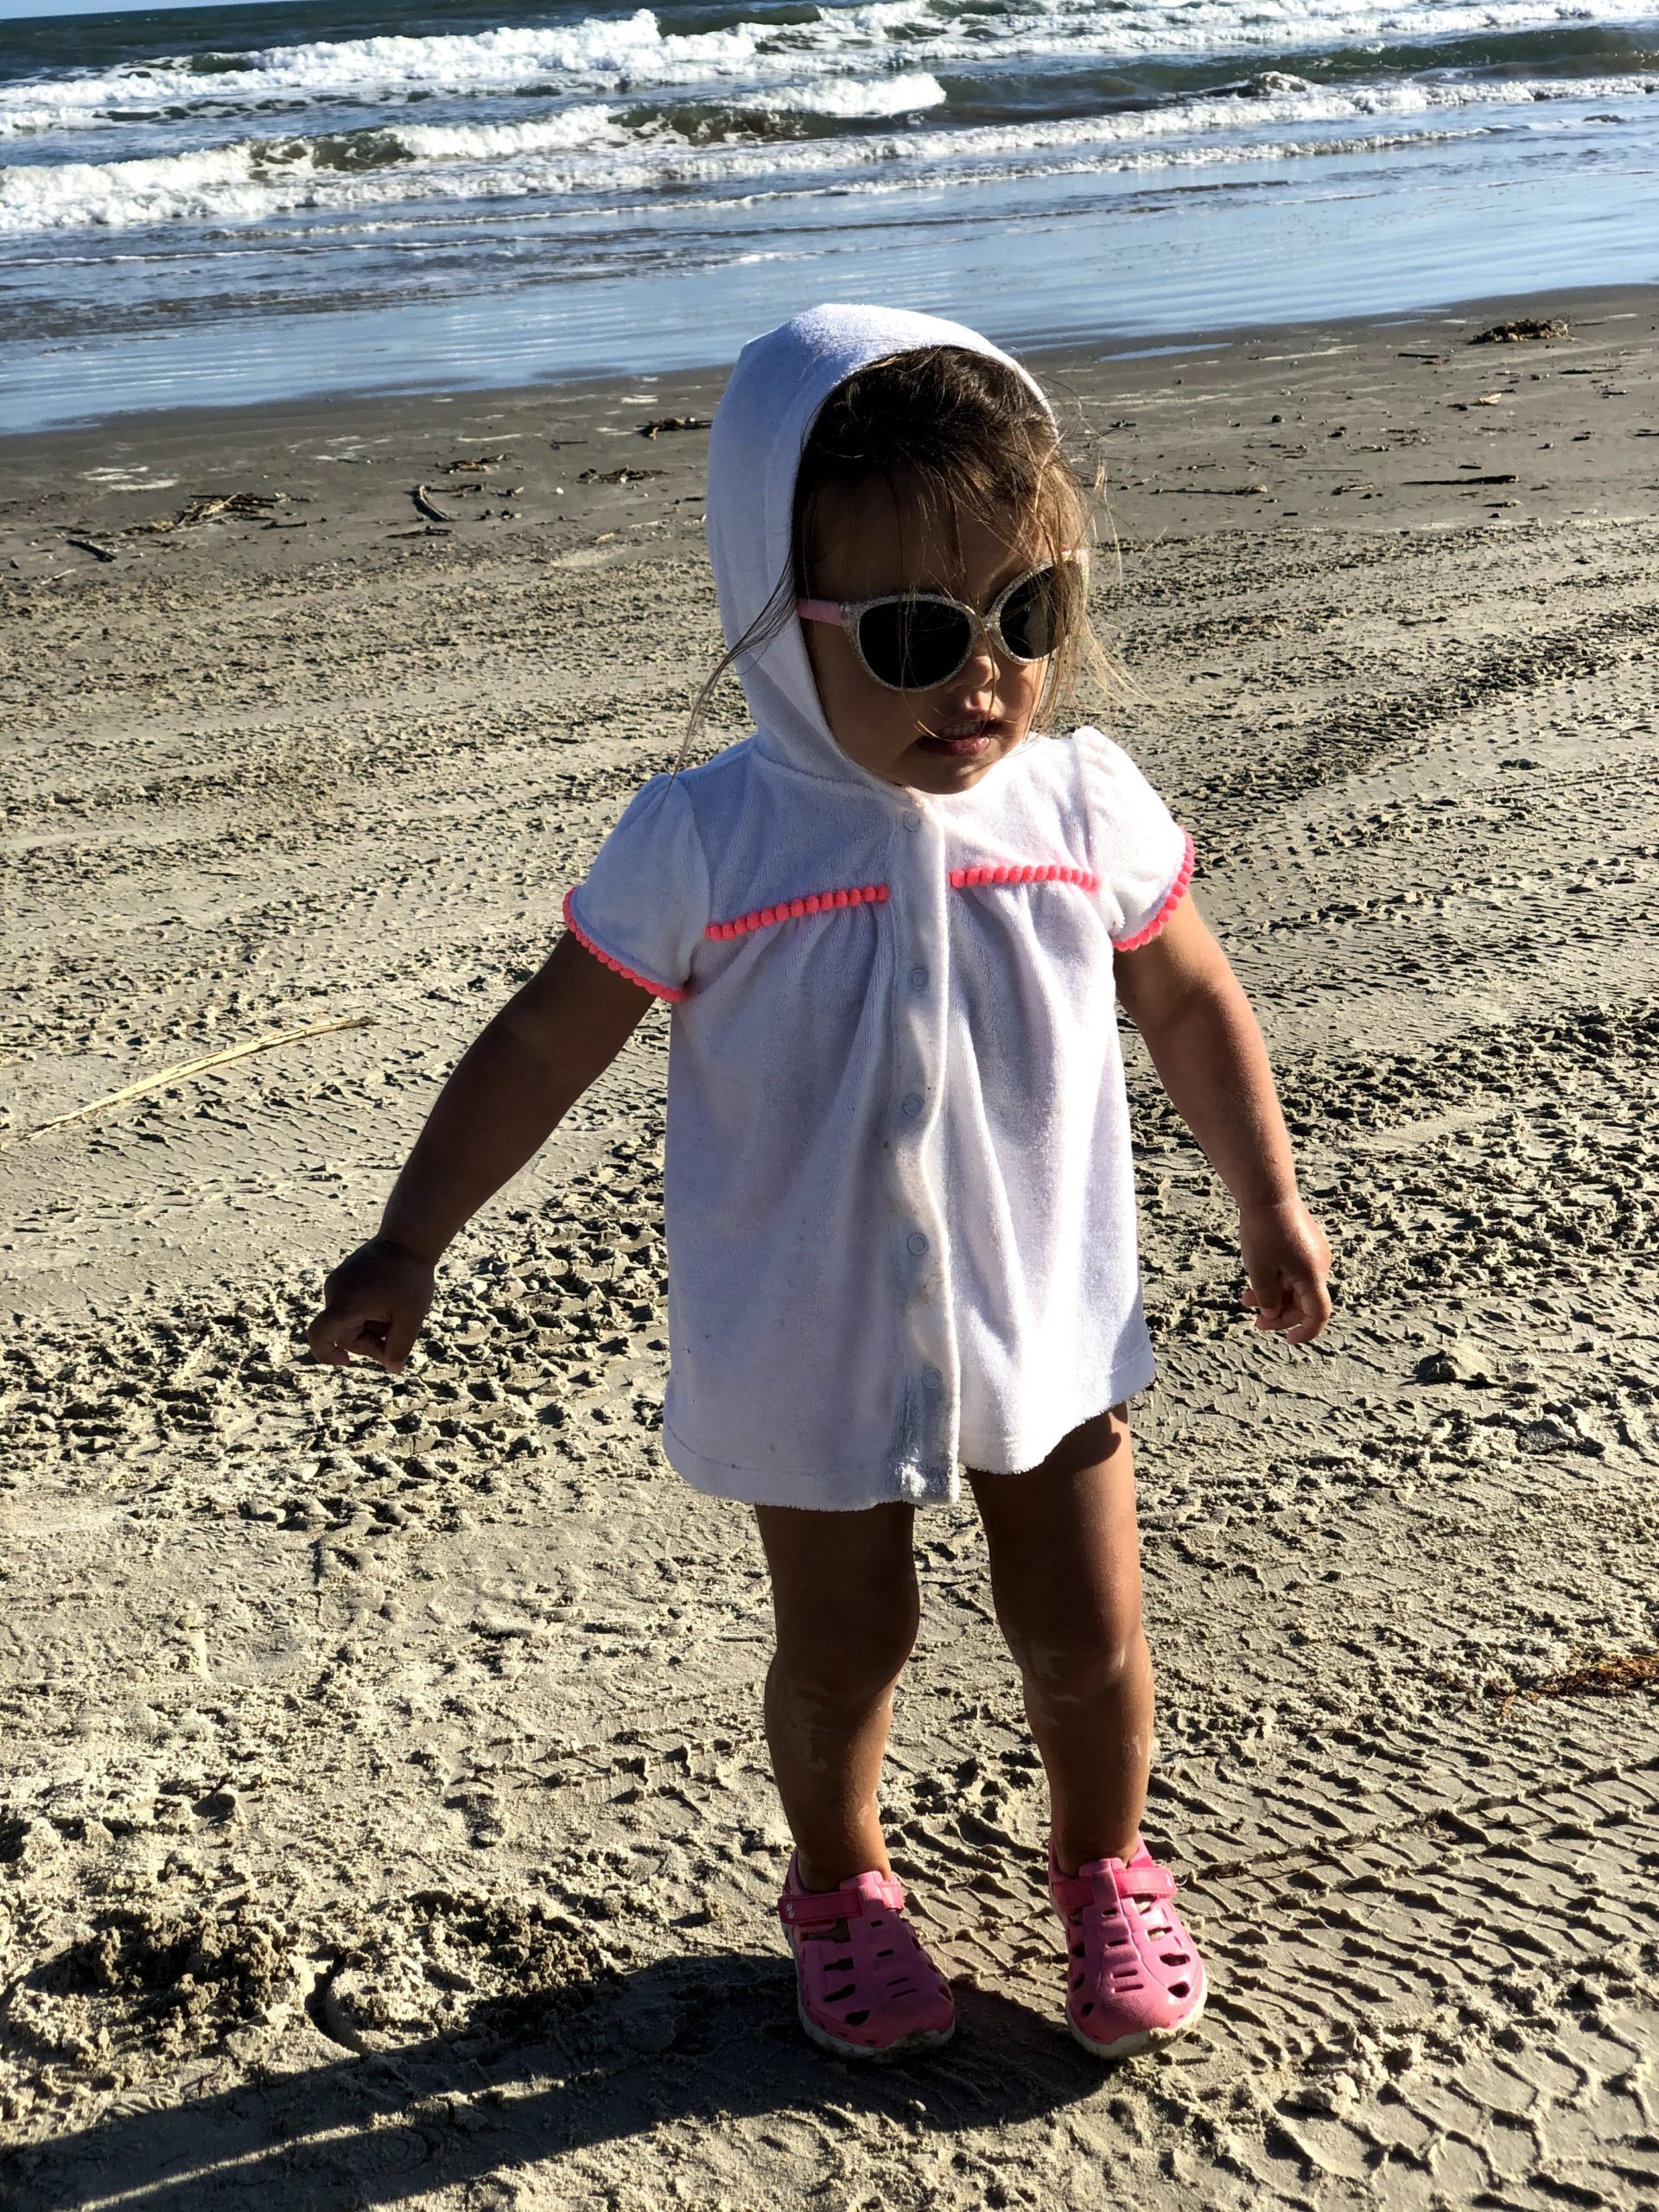 A in her sunglasses on the beach